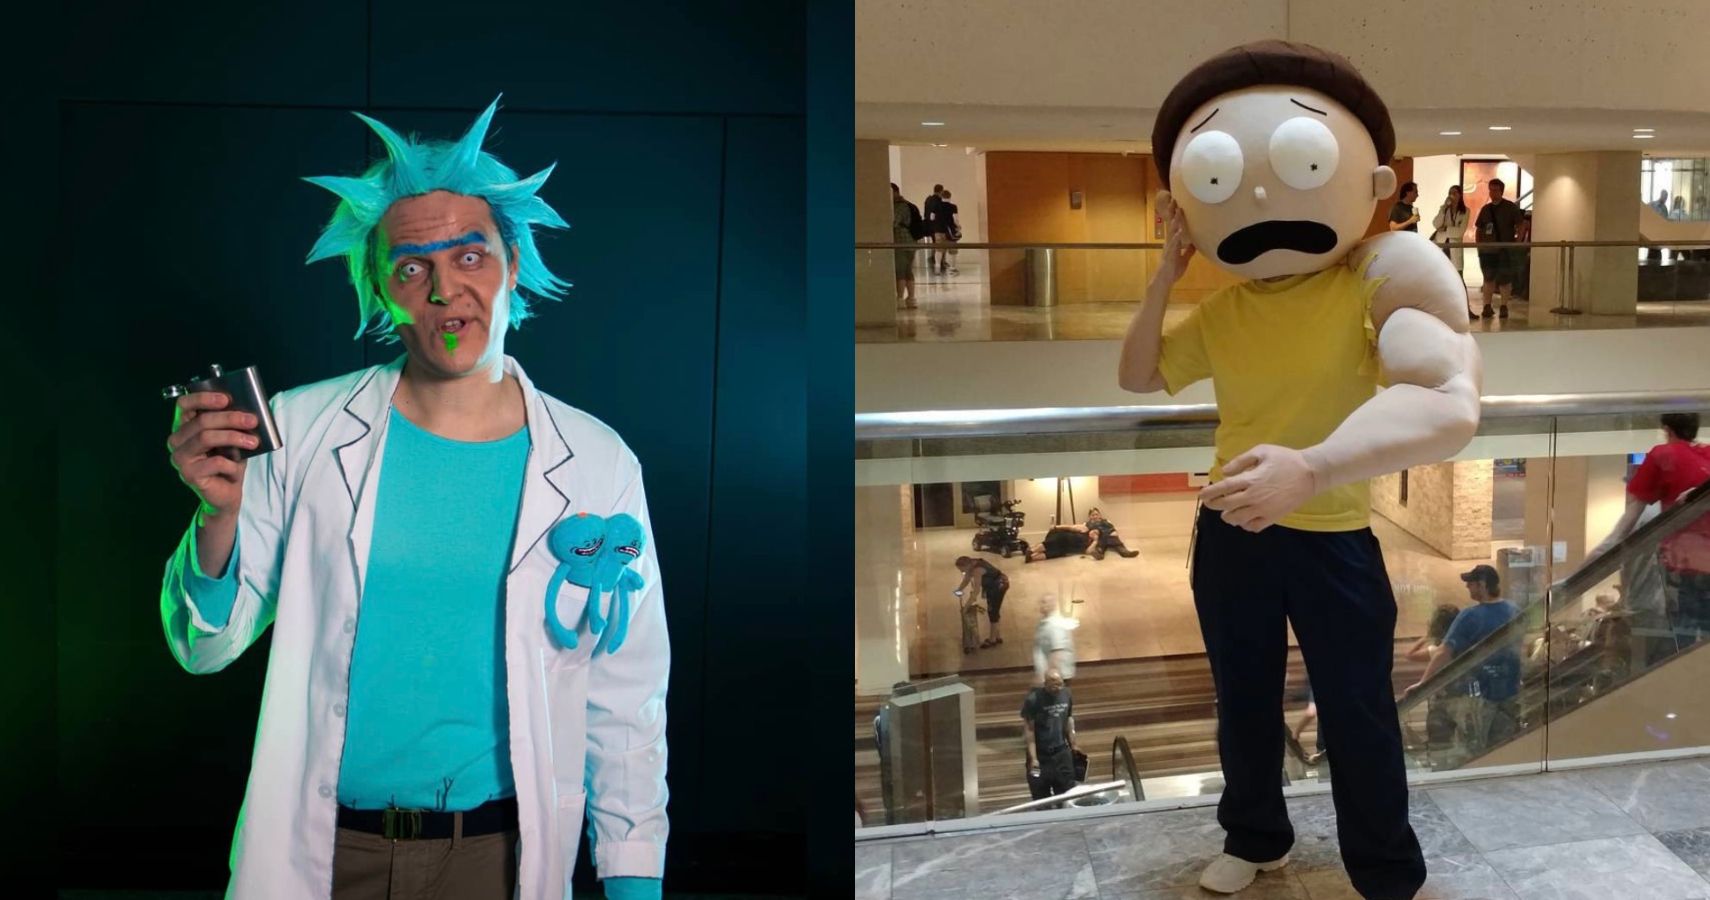 Be discouraged amateur custom rick and morty costume.